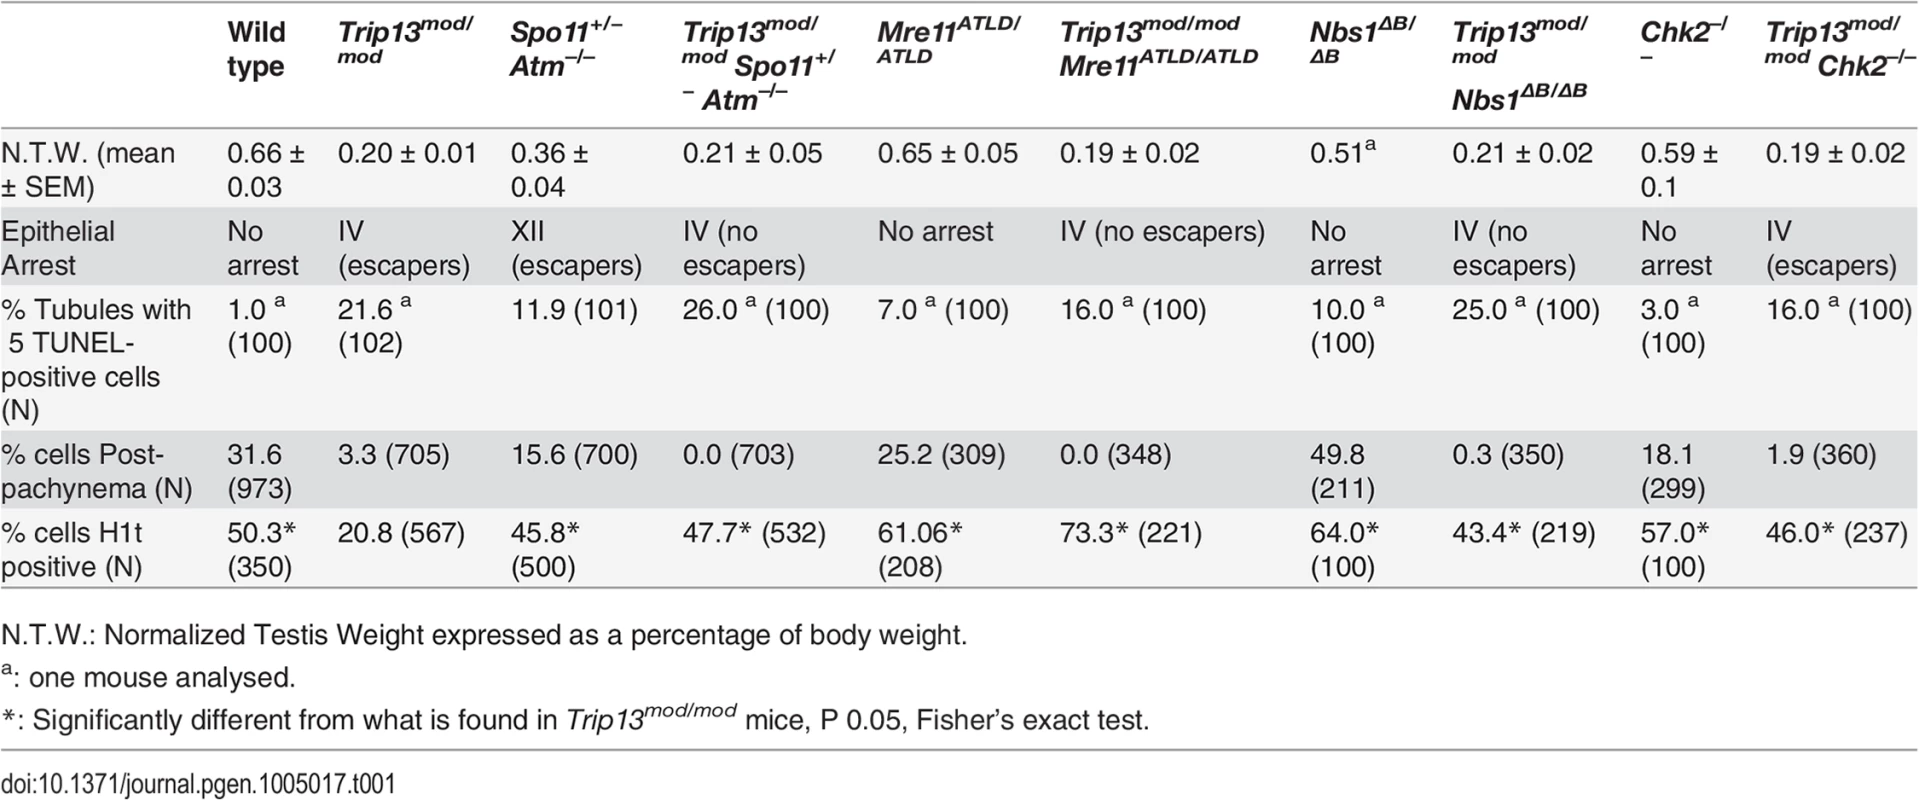 Testicular and meiotic phenotypes of wild-type and mutant mice.